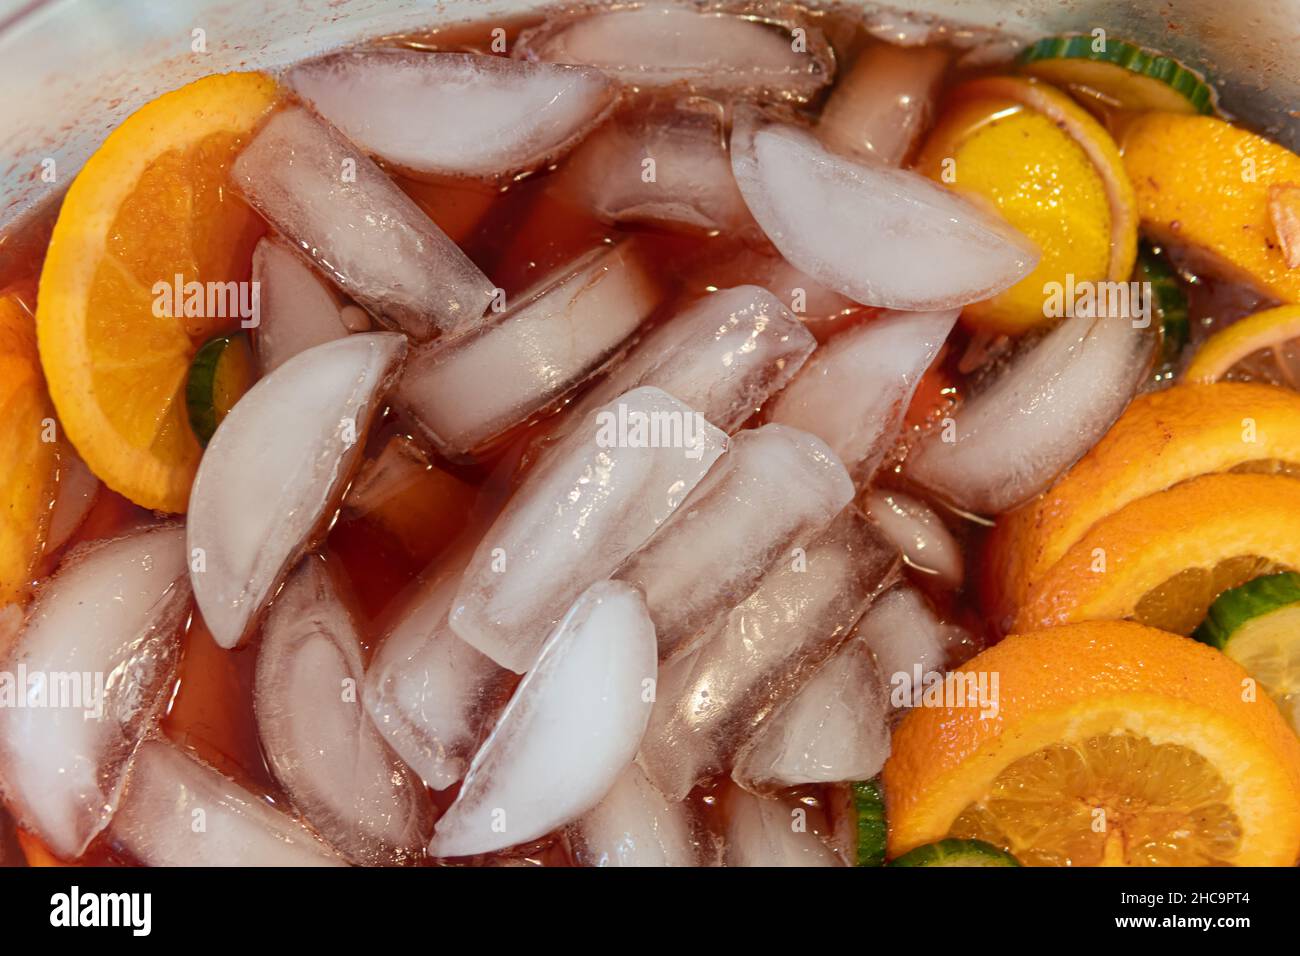 fruit punch in a drink dispenser at a party Stock Photo - Alamy